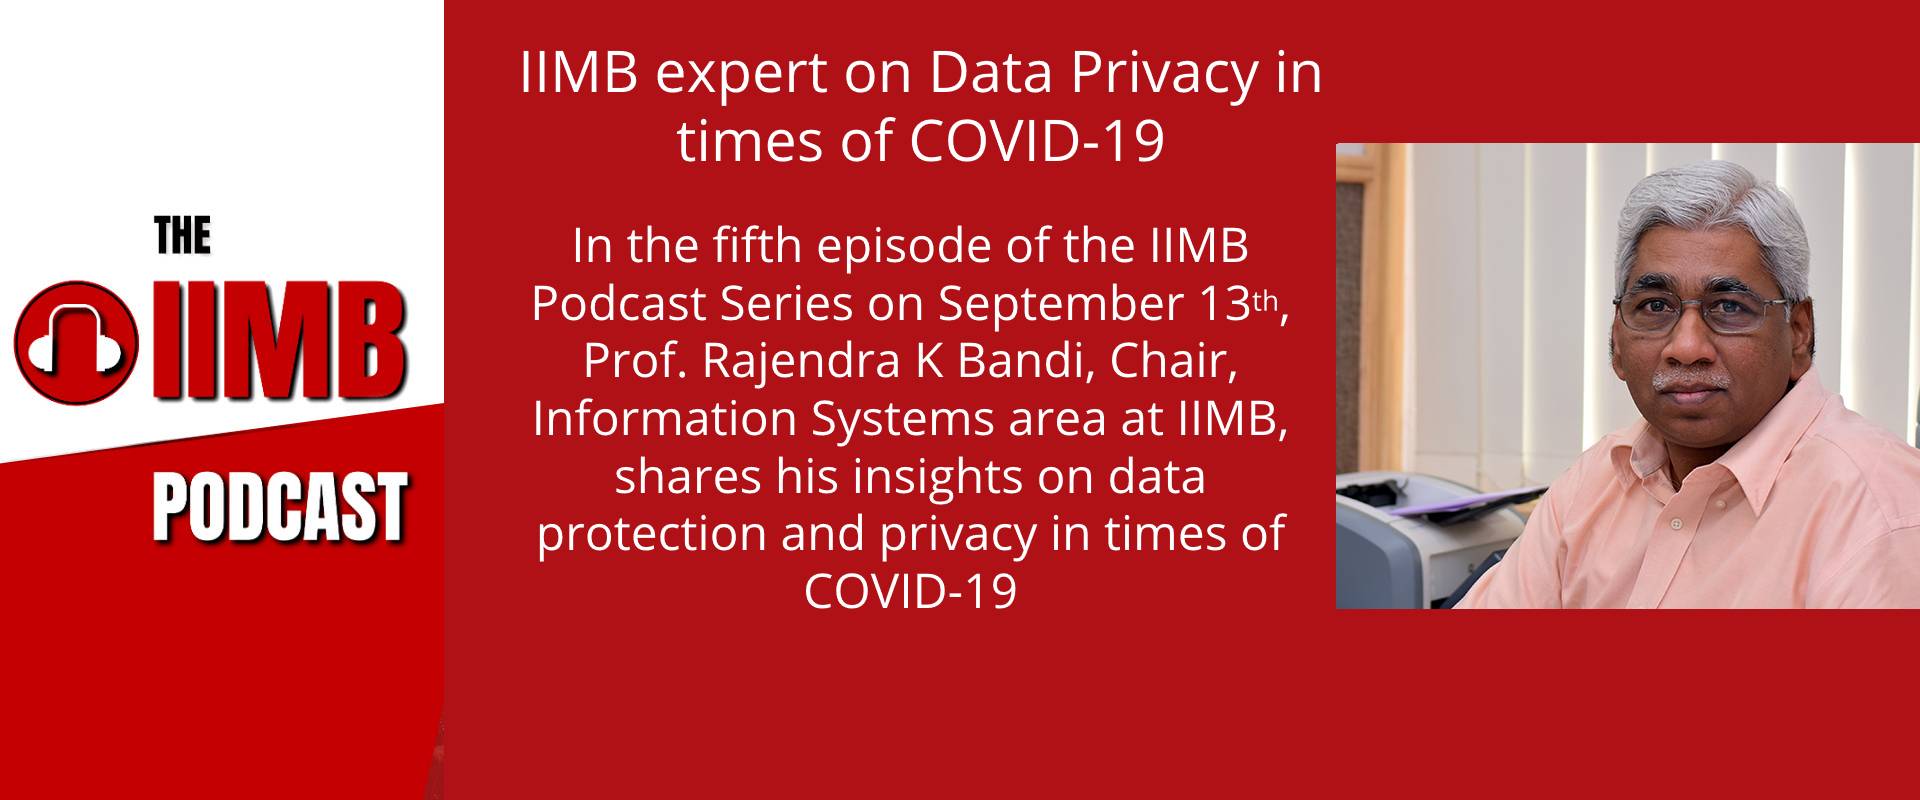 IIMB expert on Data Privacy in times of COVID-19